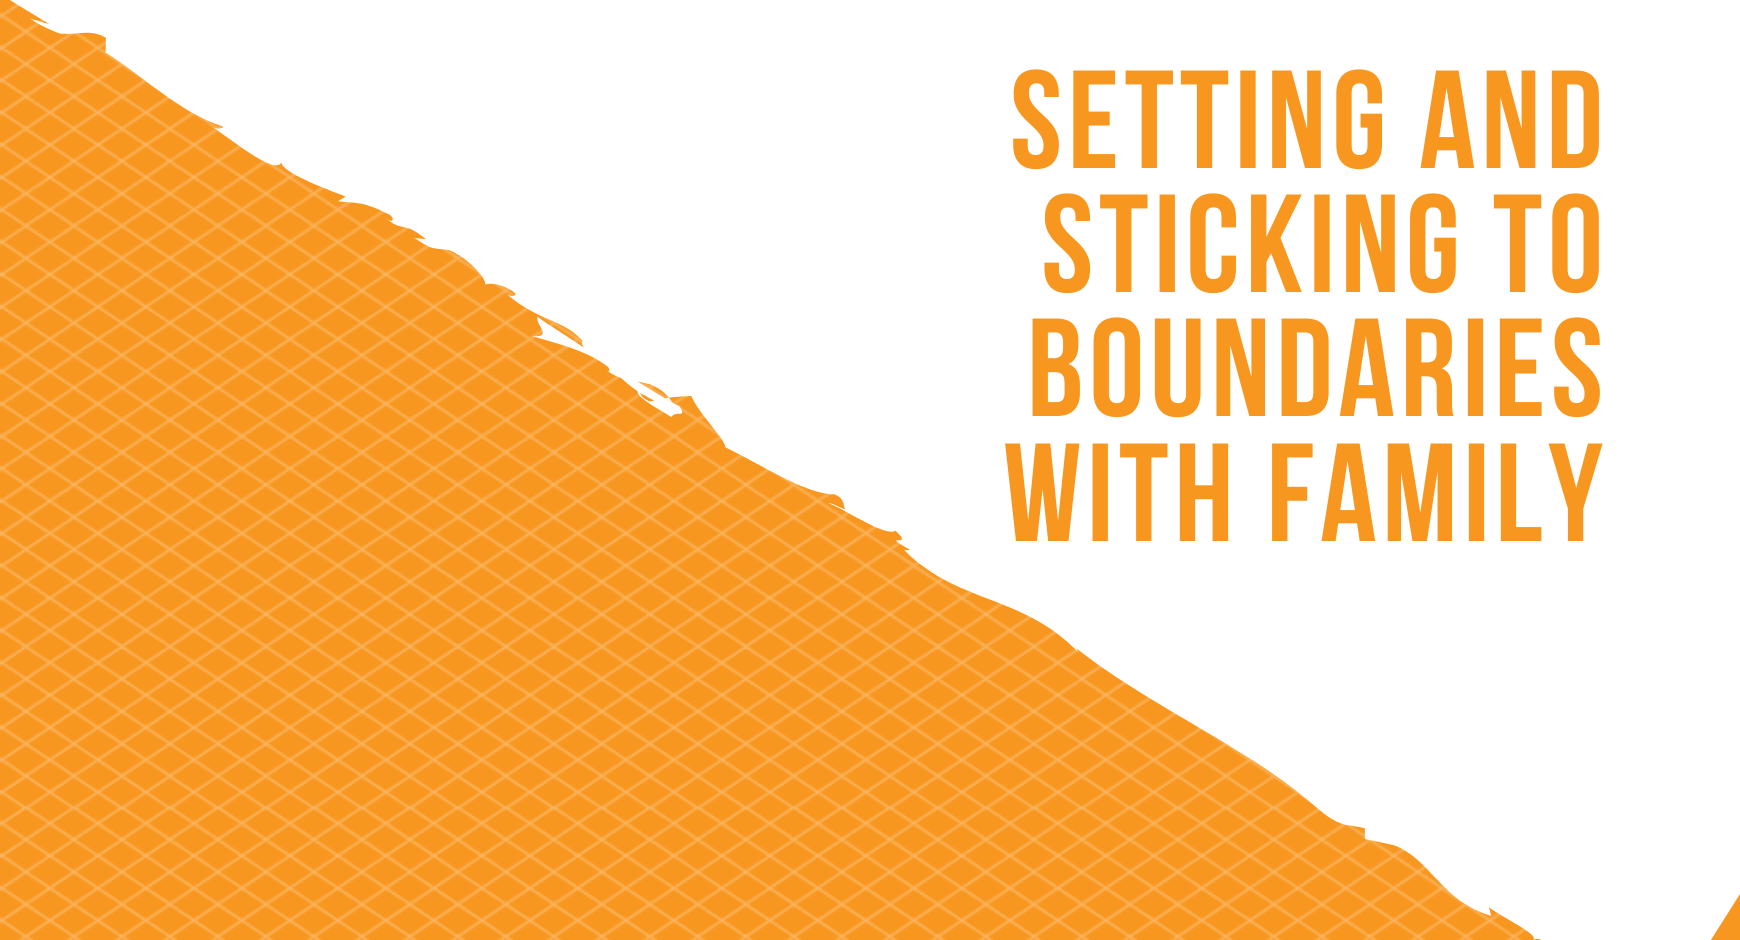 On a diagonal across the graphic lies an orange triangle with jagged edges that is lined like graph paper. The other part is white with the text "Setting and Sticking to Boundaries with Family" in orange letters. 